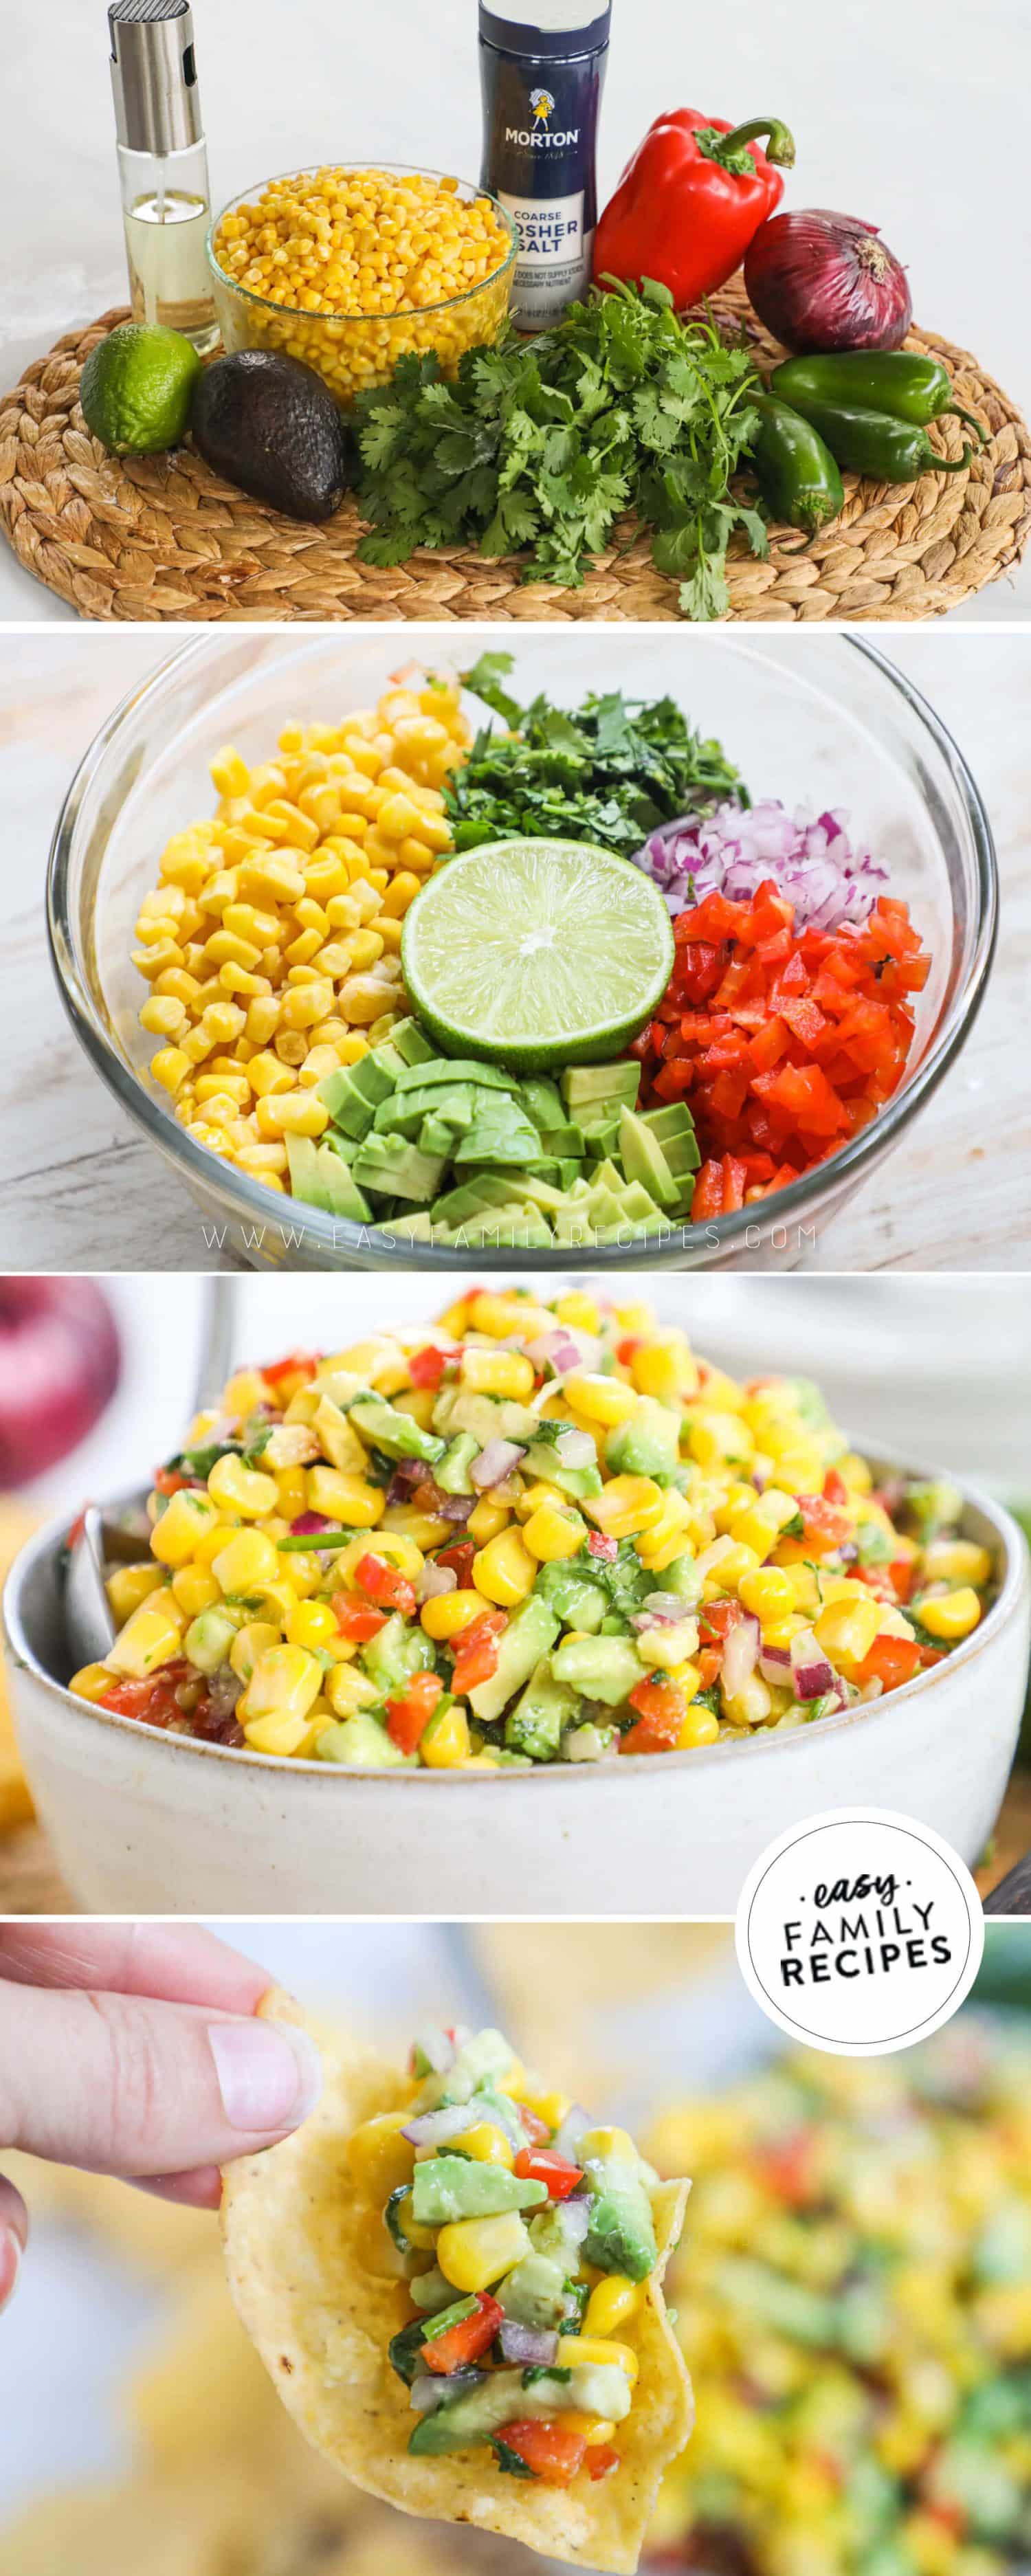 4 image collage showing the ingredients before being prepped, prepped in a bowl before being mixed, in a serving bowl, and with a tortilla chip loaded with some on it.